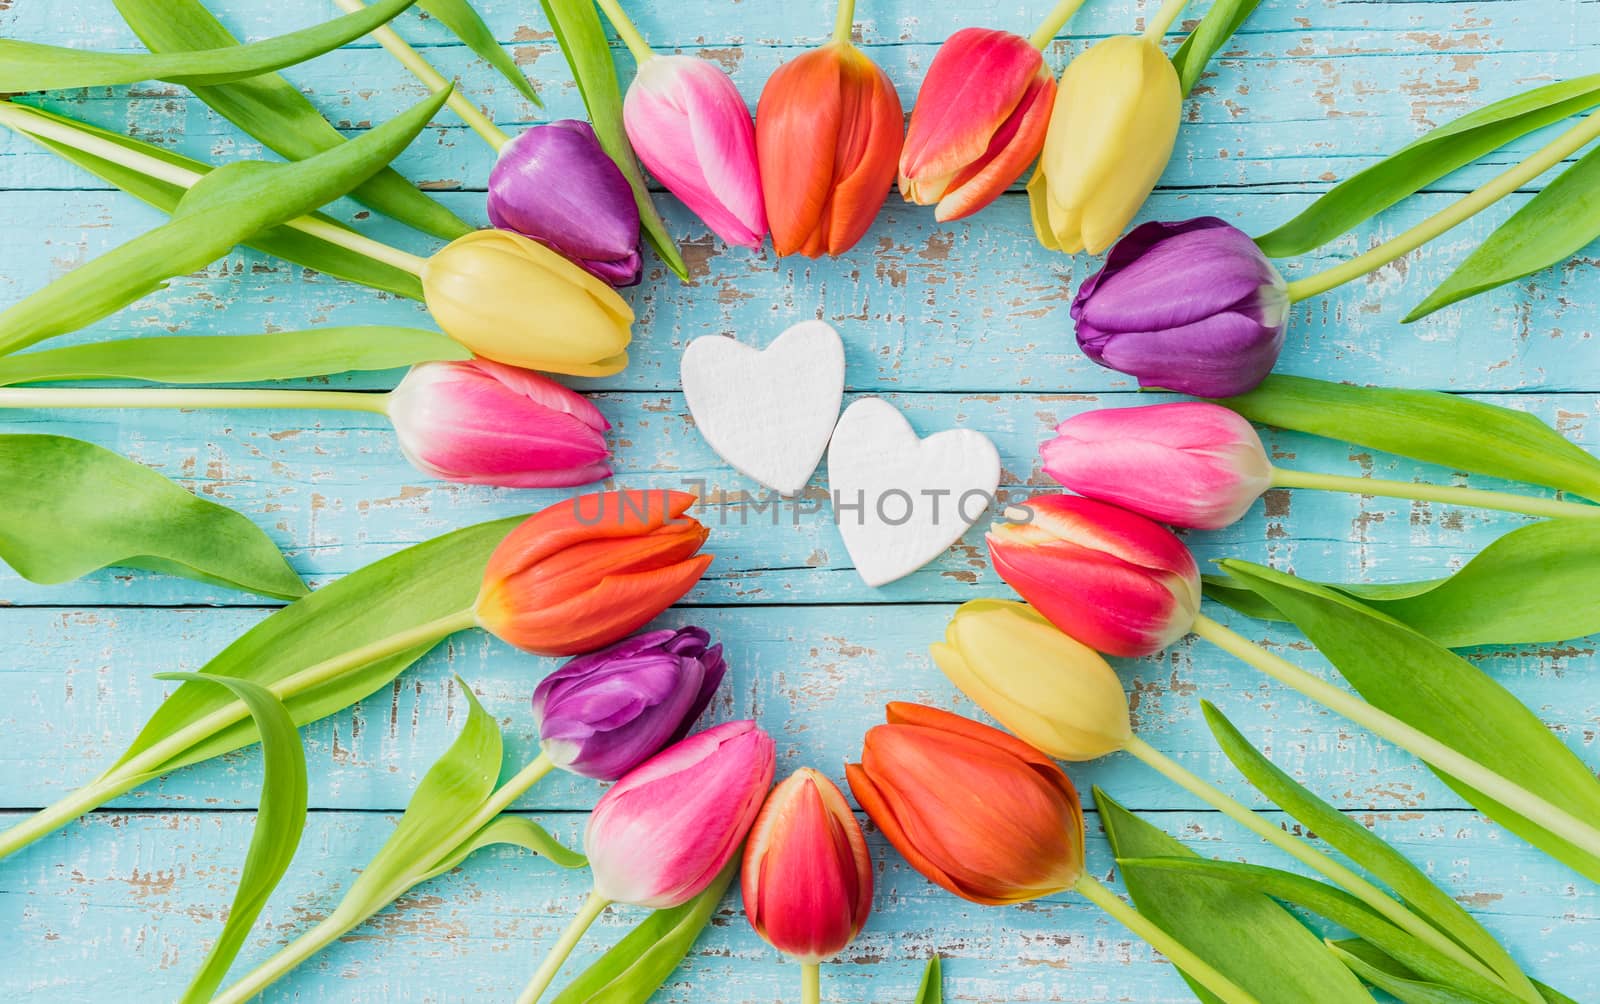 Romantic love background with hearts and beautiful flowers